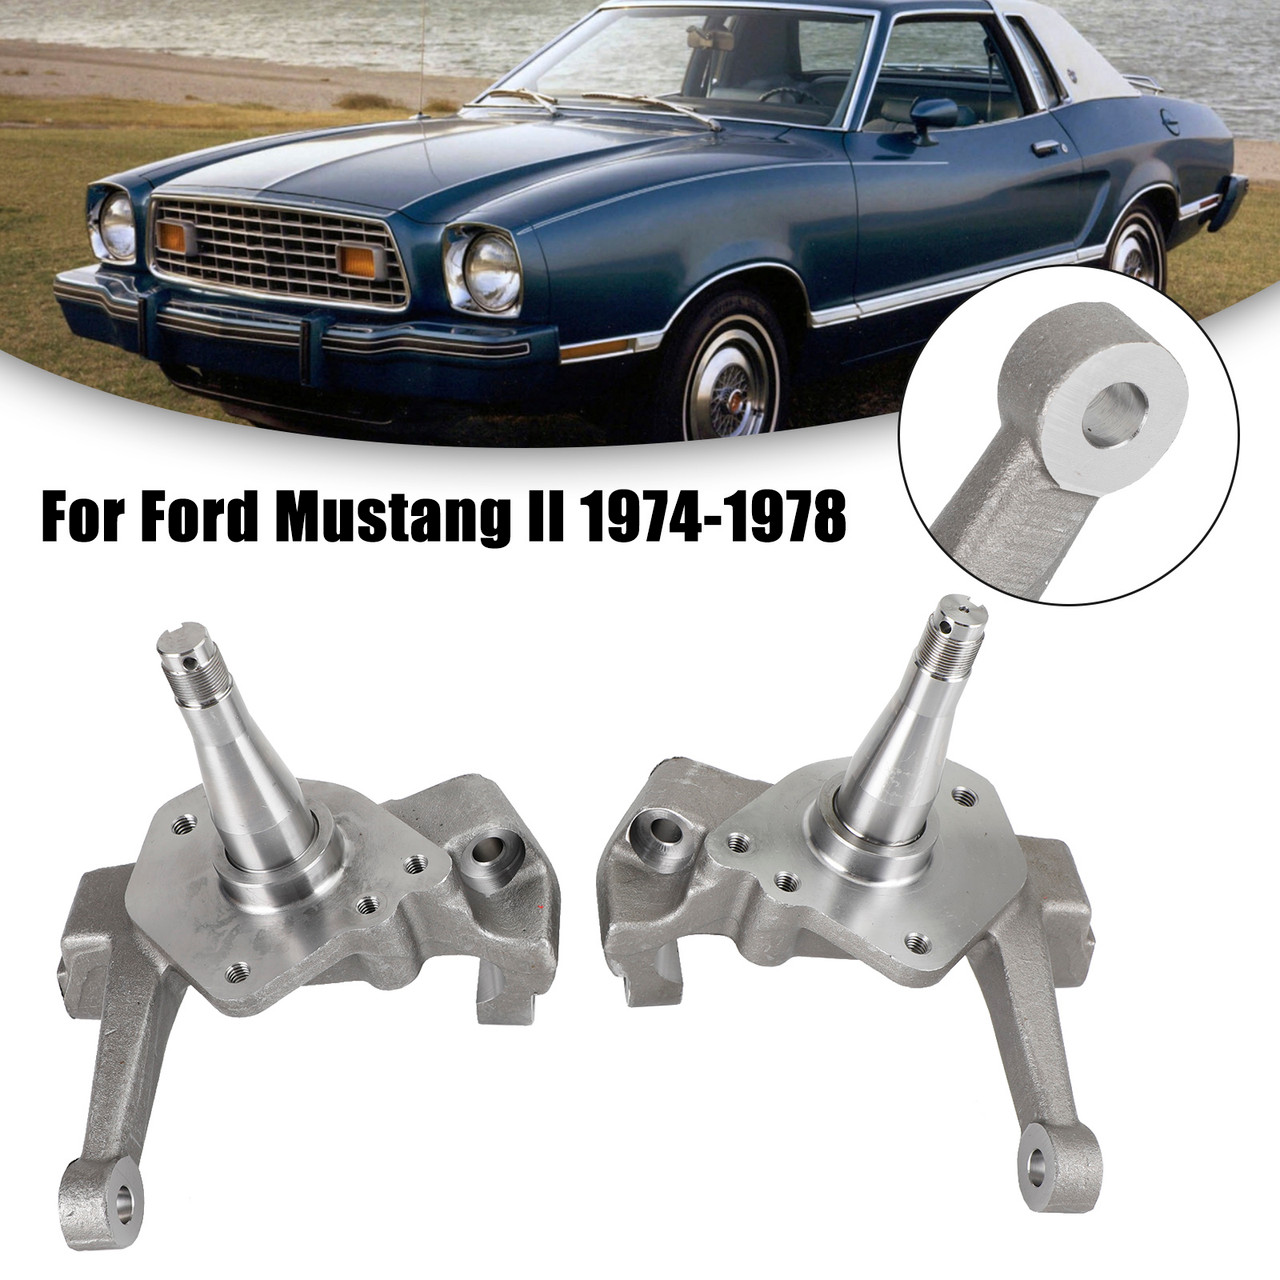 1974-1978 Ford Mustang II 2" Drop Spindles